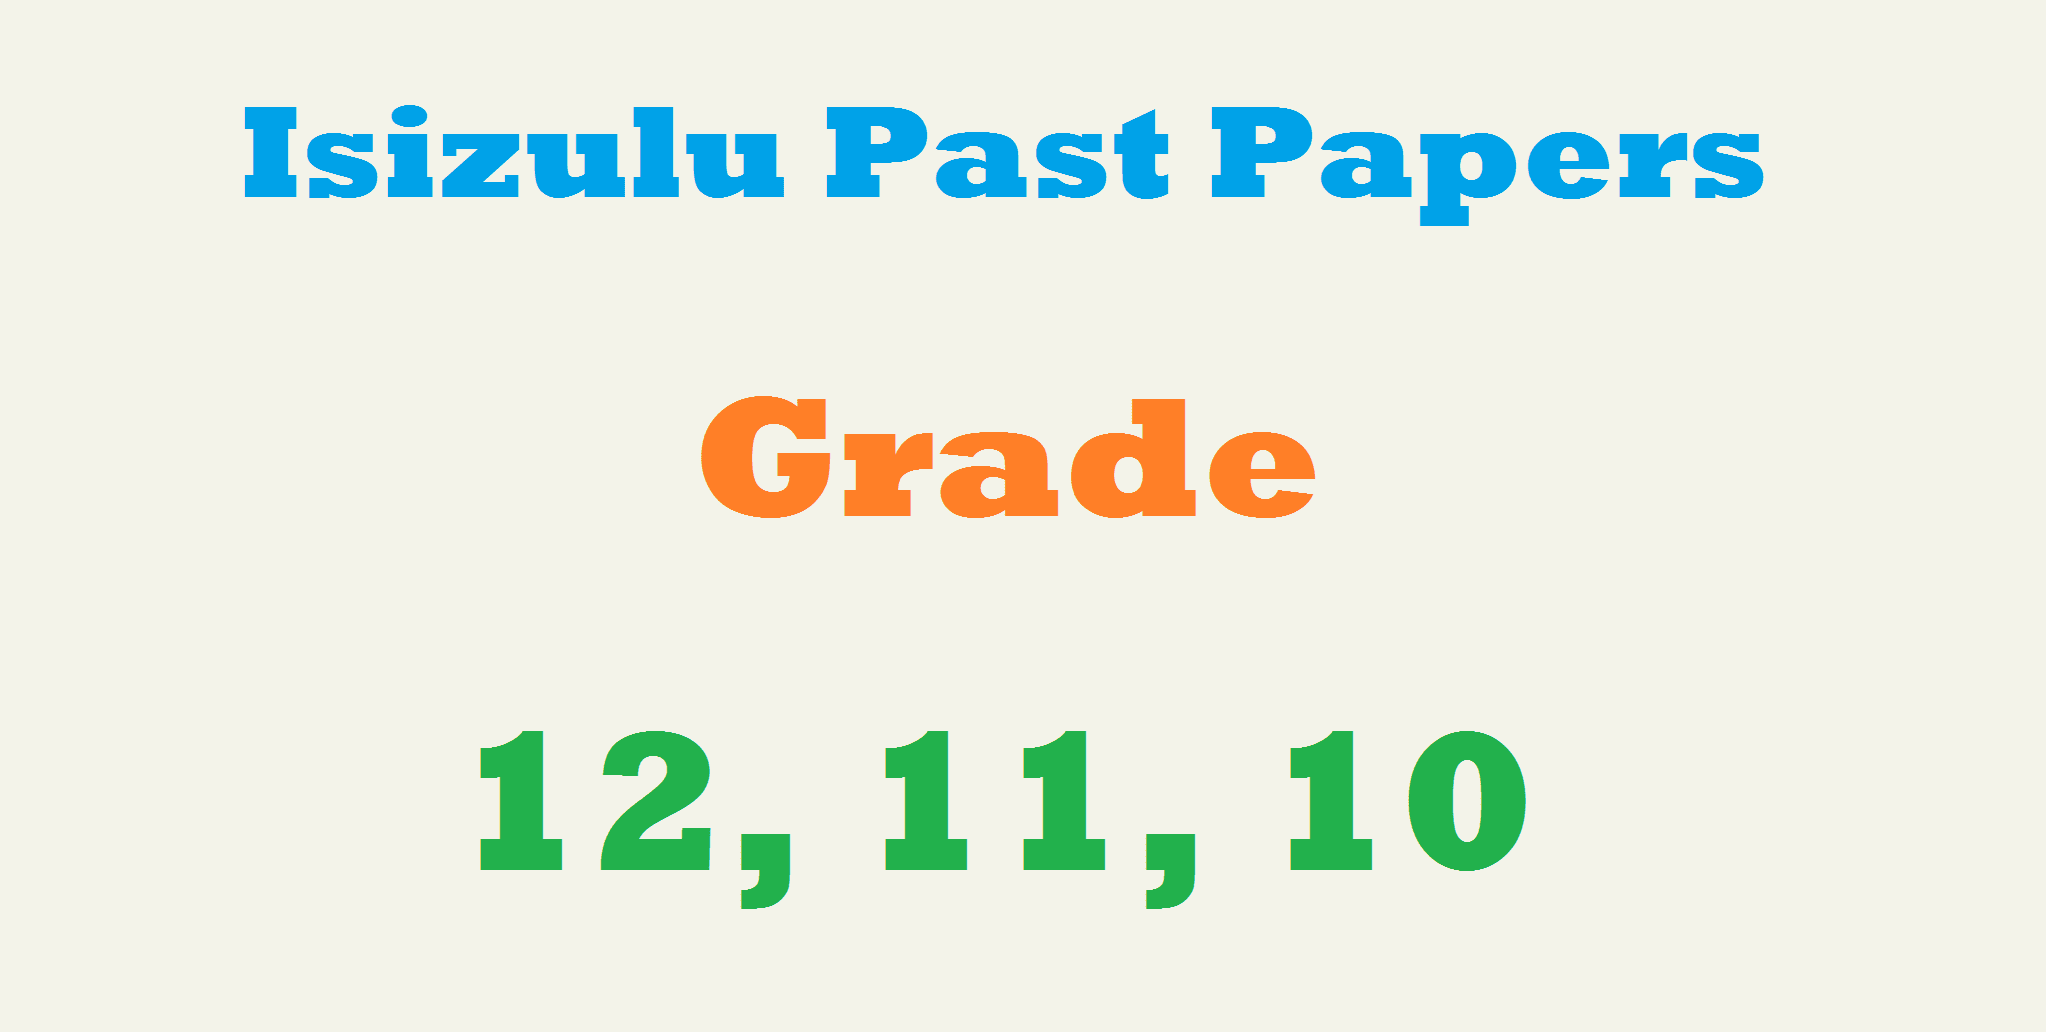 Isizulu Past Papers Grade 12, 11, 10 (Download PDF Here)